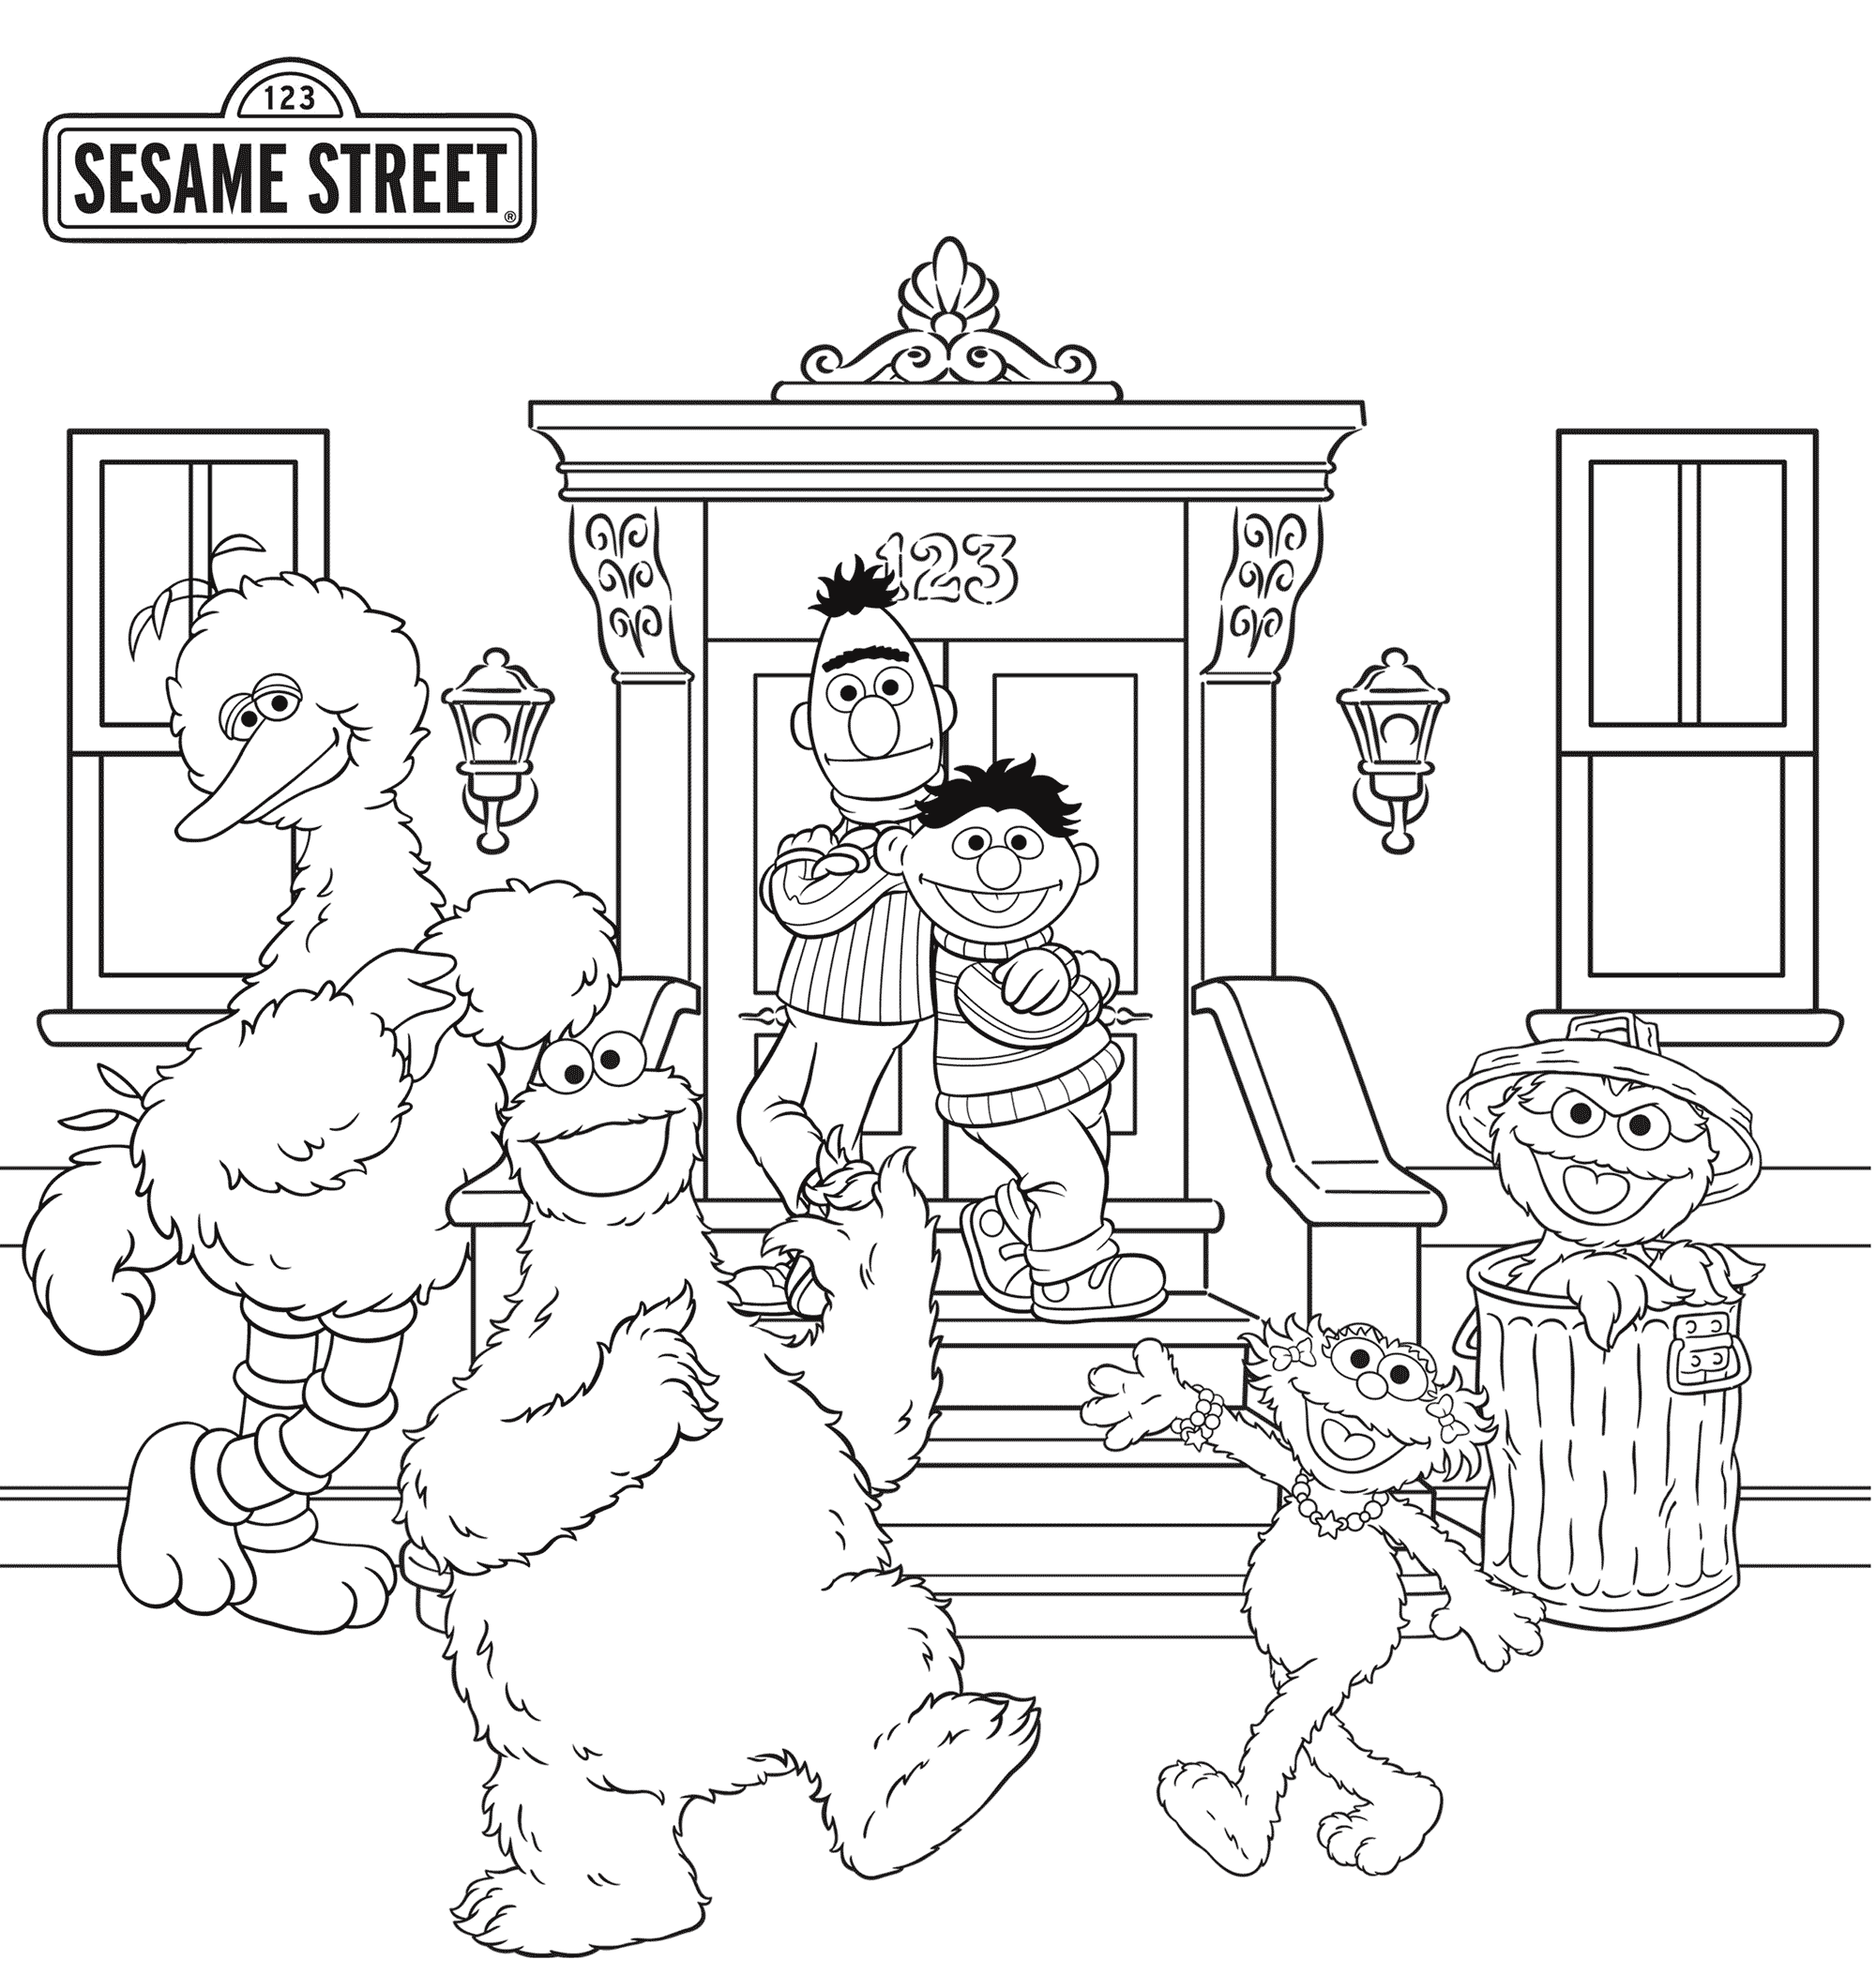 sesame street coloring pages to print Coloring4free